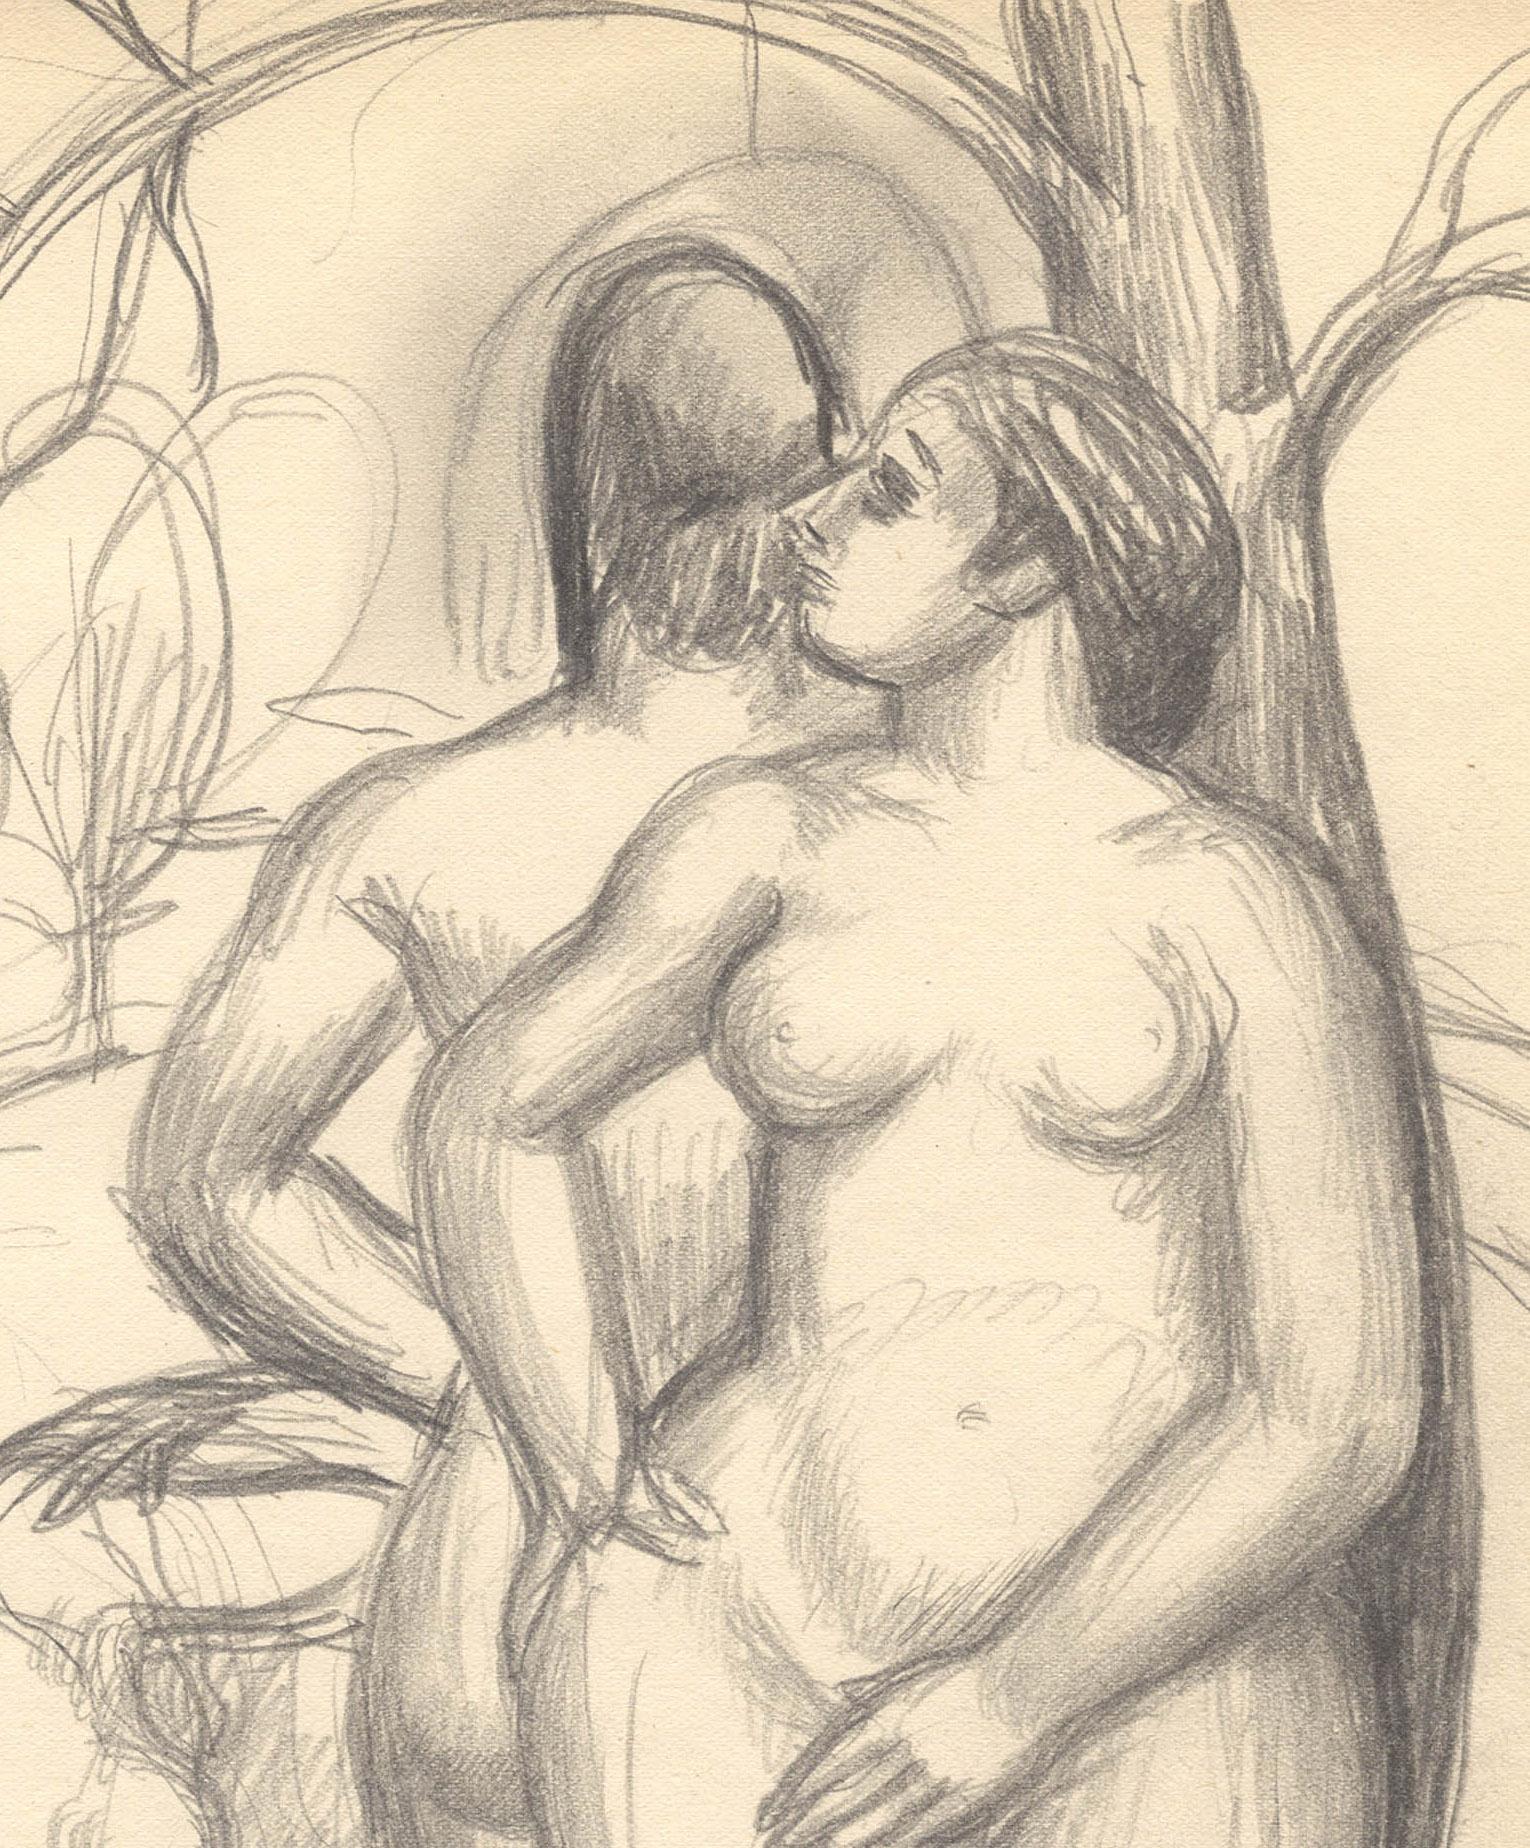 Three Nudes in a Garden
Graphite,  c. 1928-1933
Initialed in pencil lower left (see photo)
Illustrated: Elliott & Wooden, Aaron Bohrod: Figure Sketches, Fige 9, page 32 (see photo)
A copy of the hardbound books accompanies the drawing when